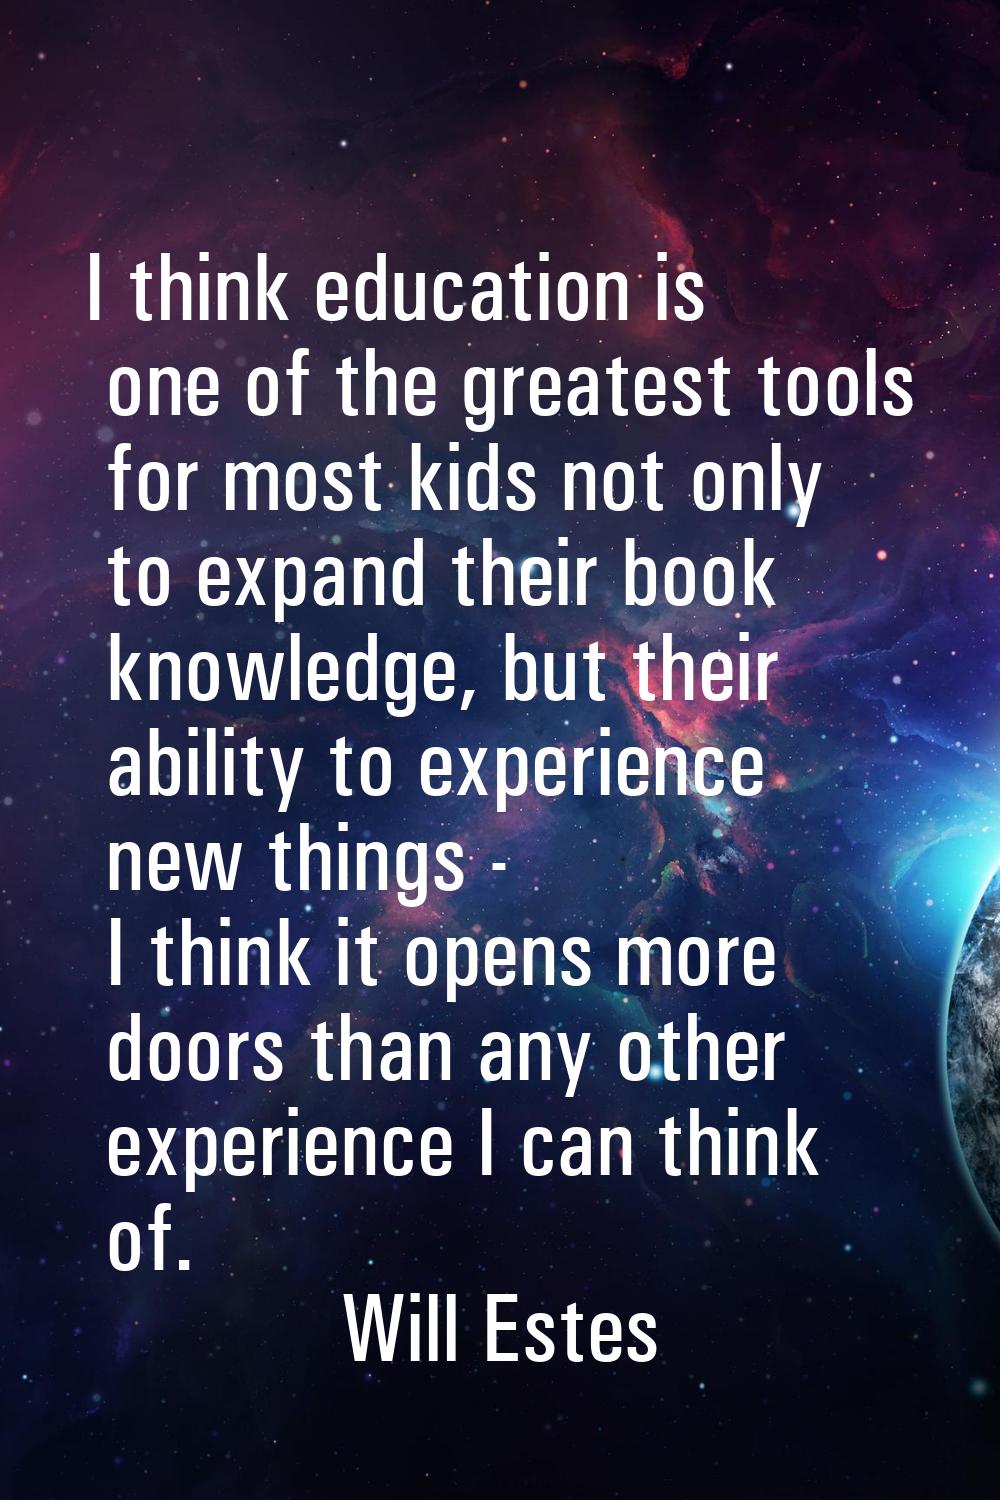 I think education is one of the greatest tools for most kids not only to expand their book knowledg